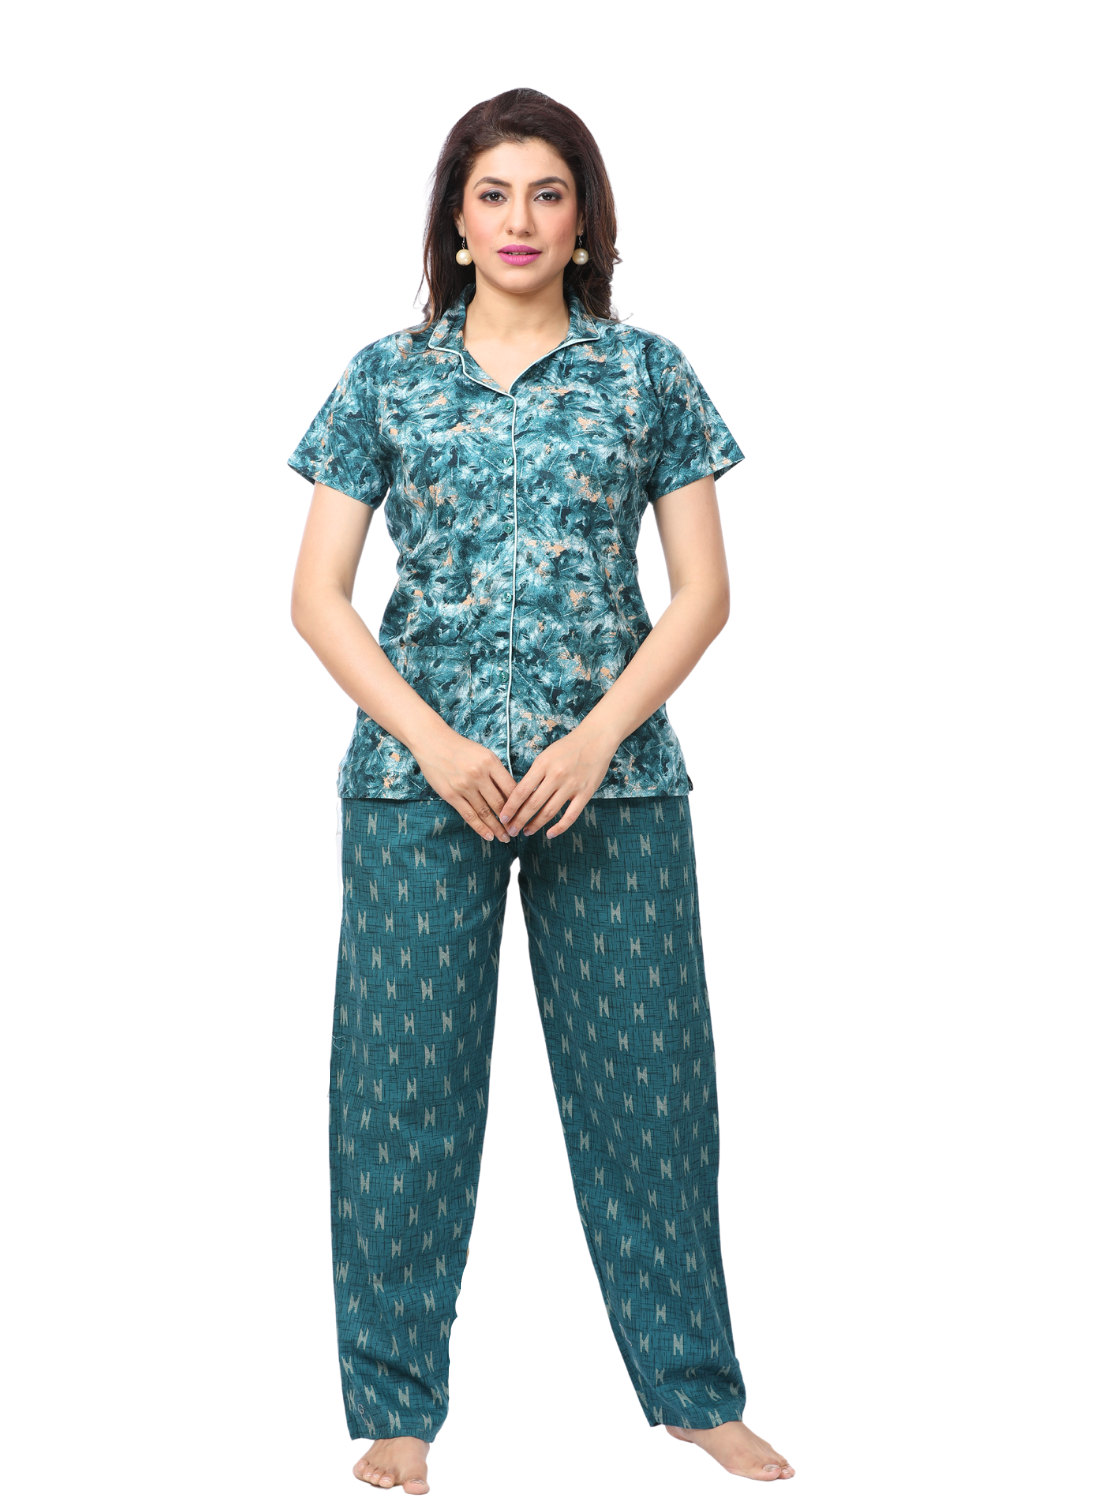 New ONLY MINE Summer Arrival Premium Cotton Night Suits - Top & Bottom Set